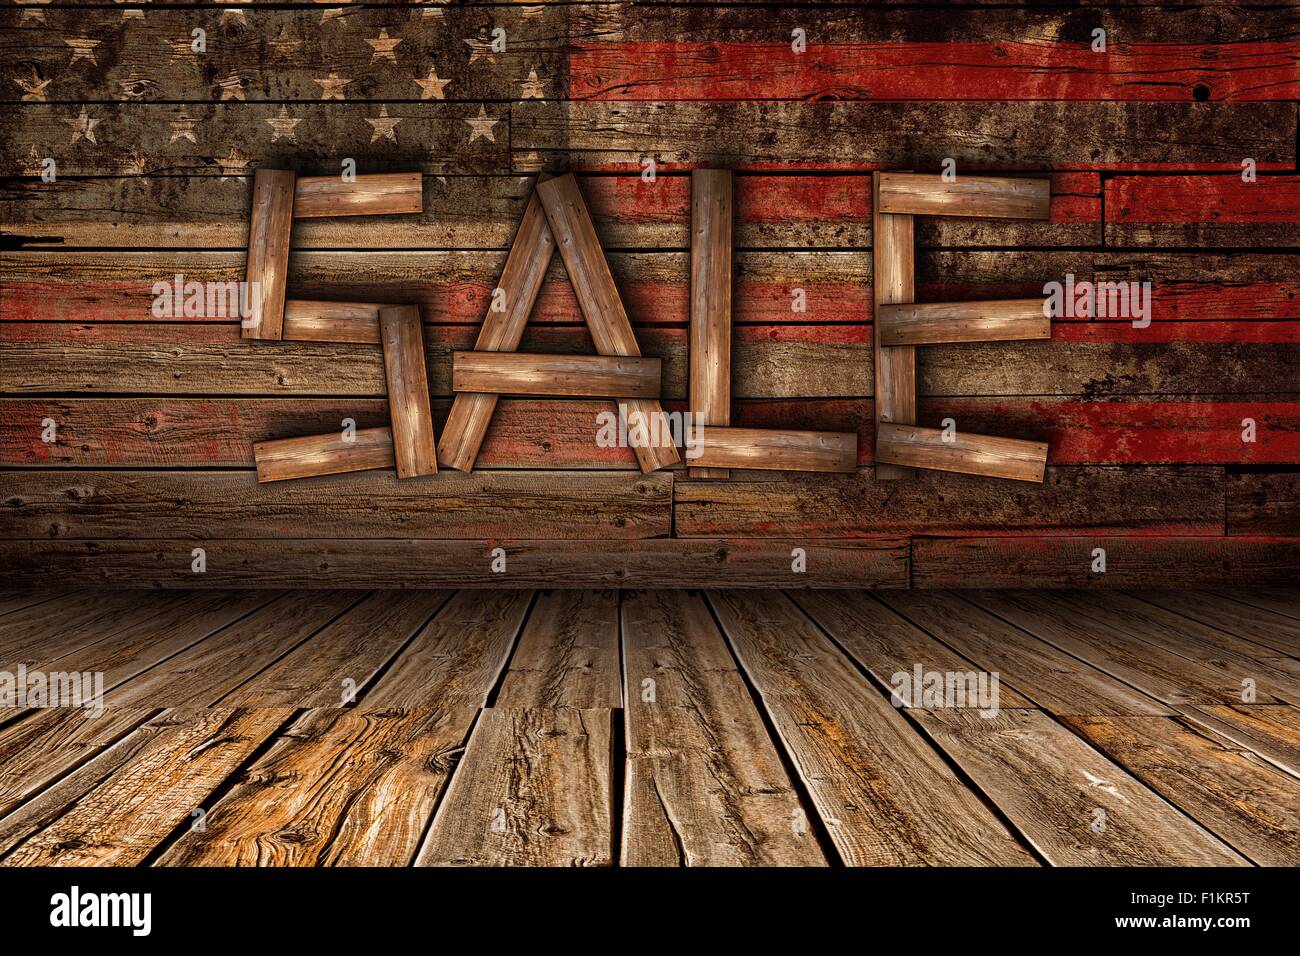 Wooden Sale on Wood Wall with American Flag Overlay. American Countryside Store Sale Concept. Stock Photo